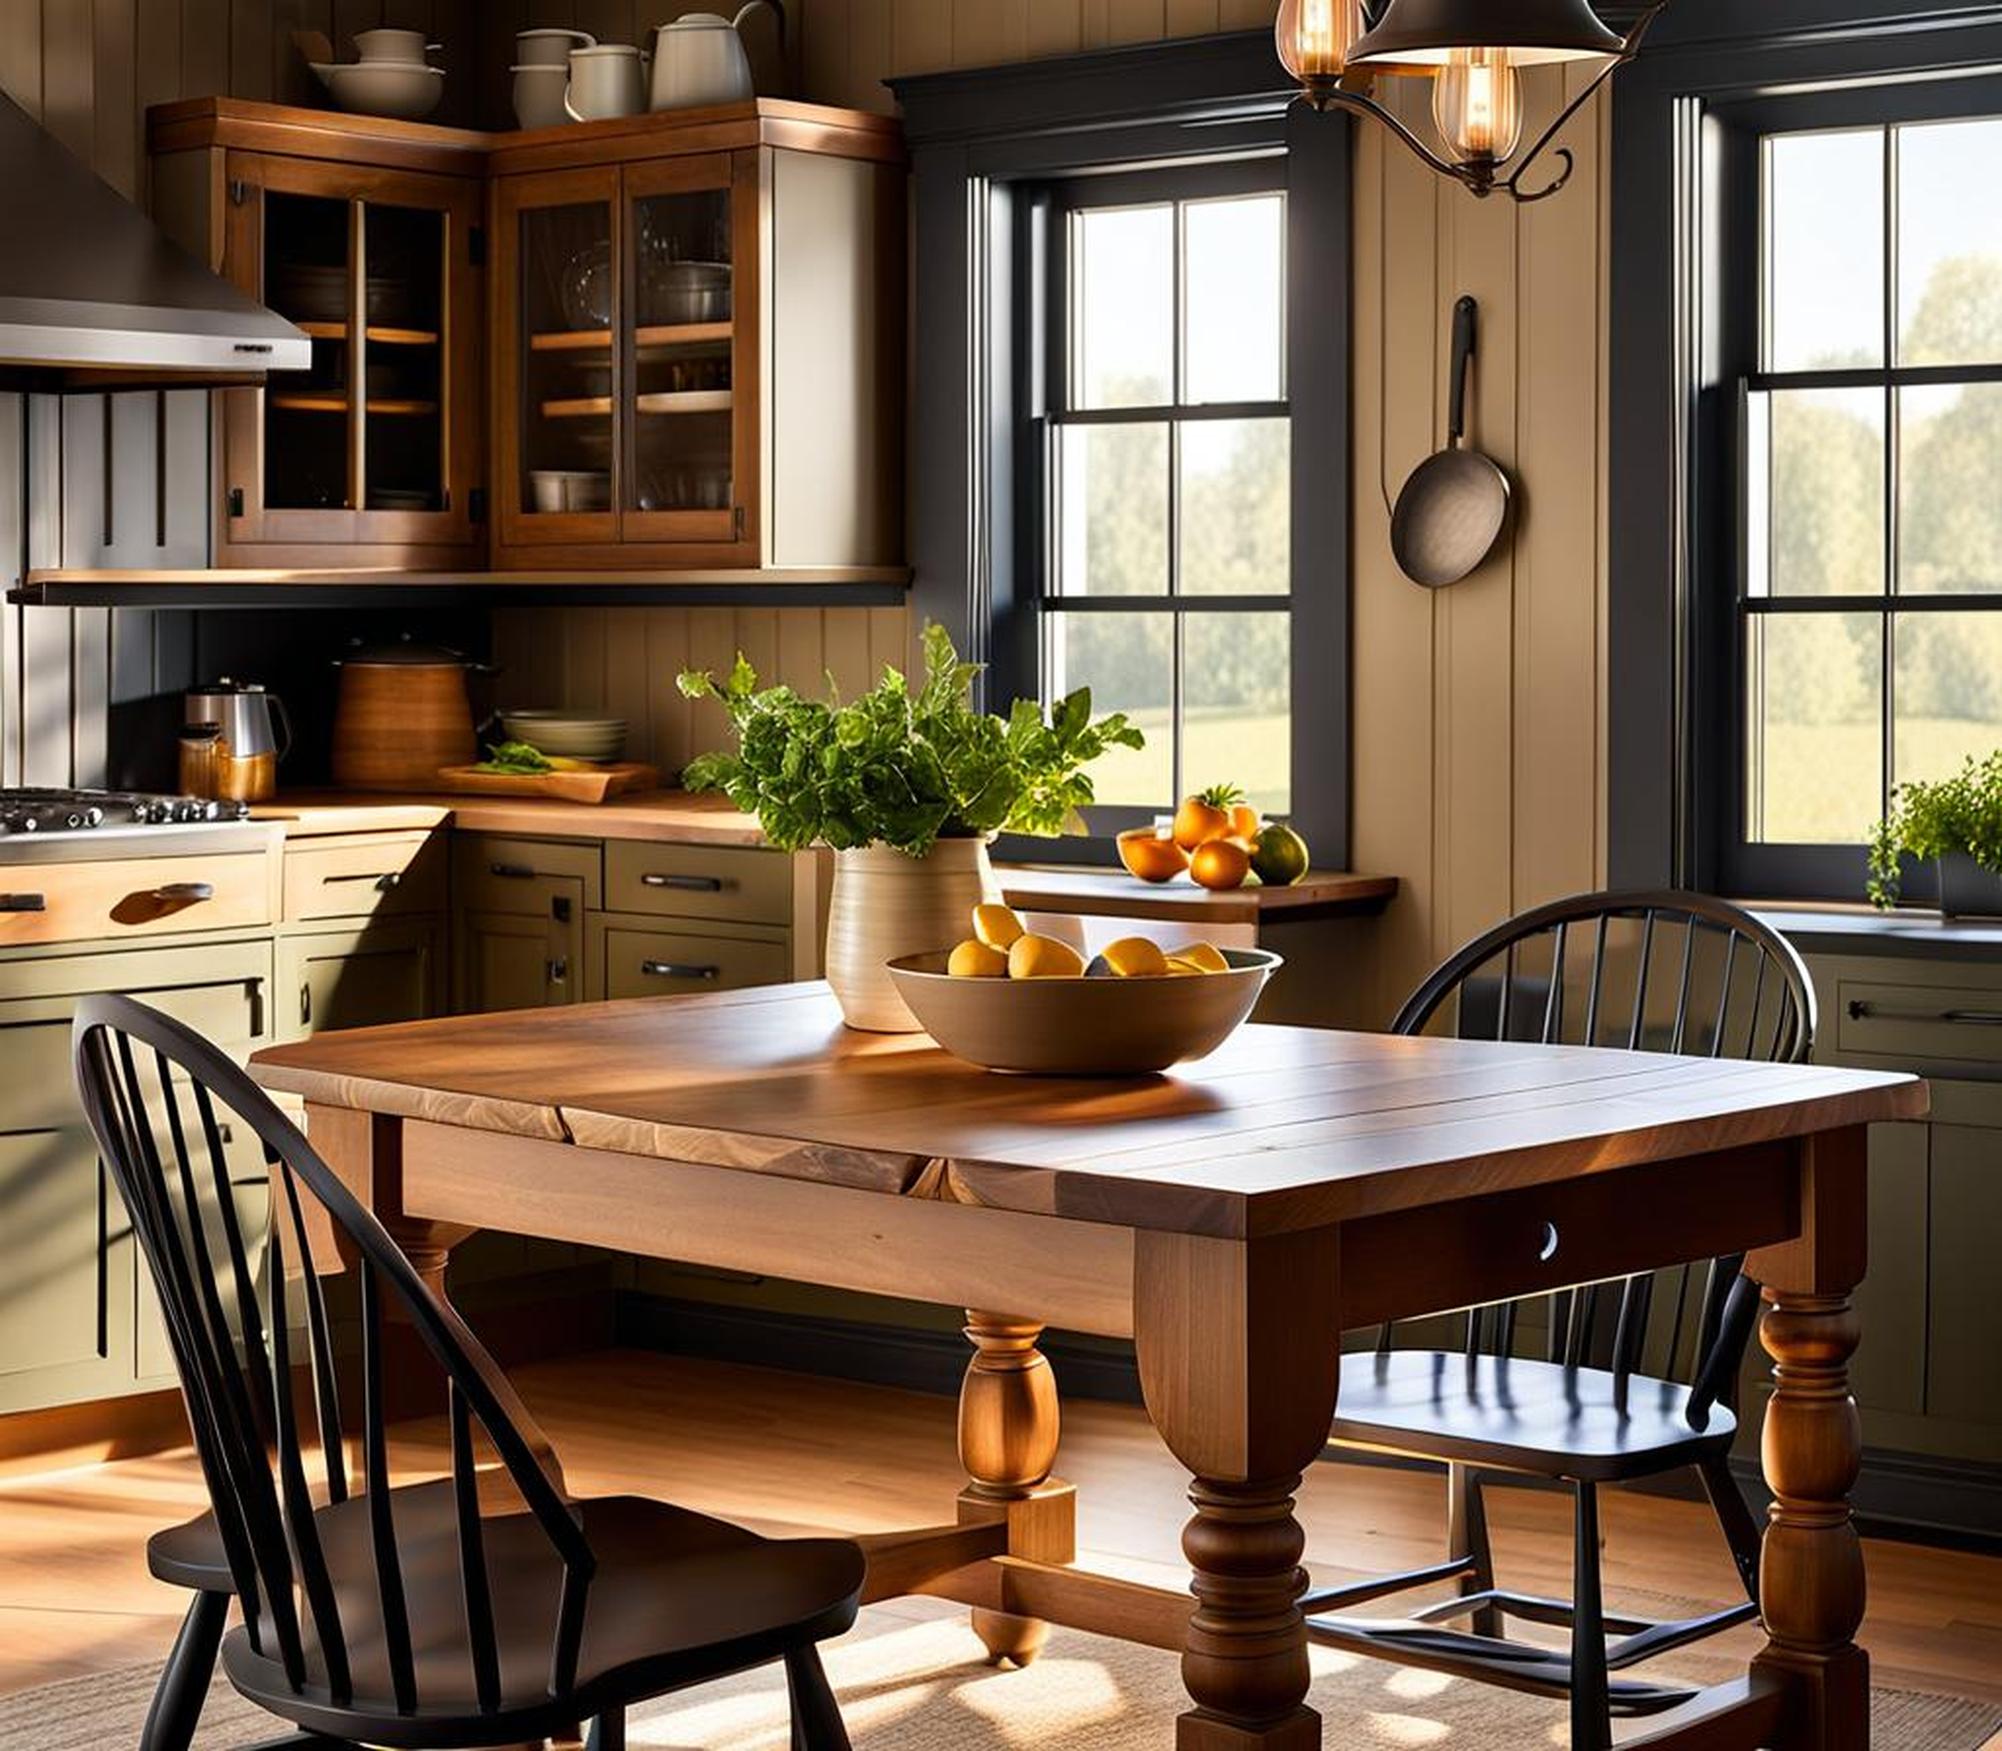 Make Your Kitchen Cozy With a Farmhouse Corner Table